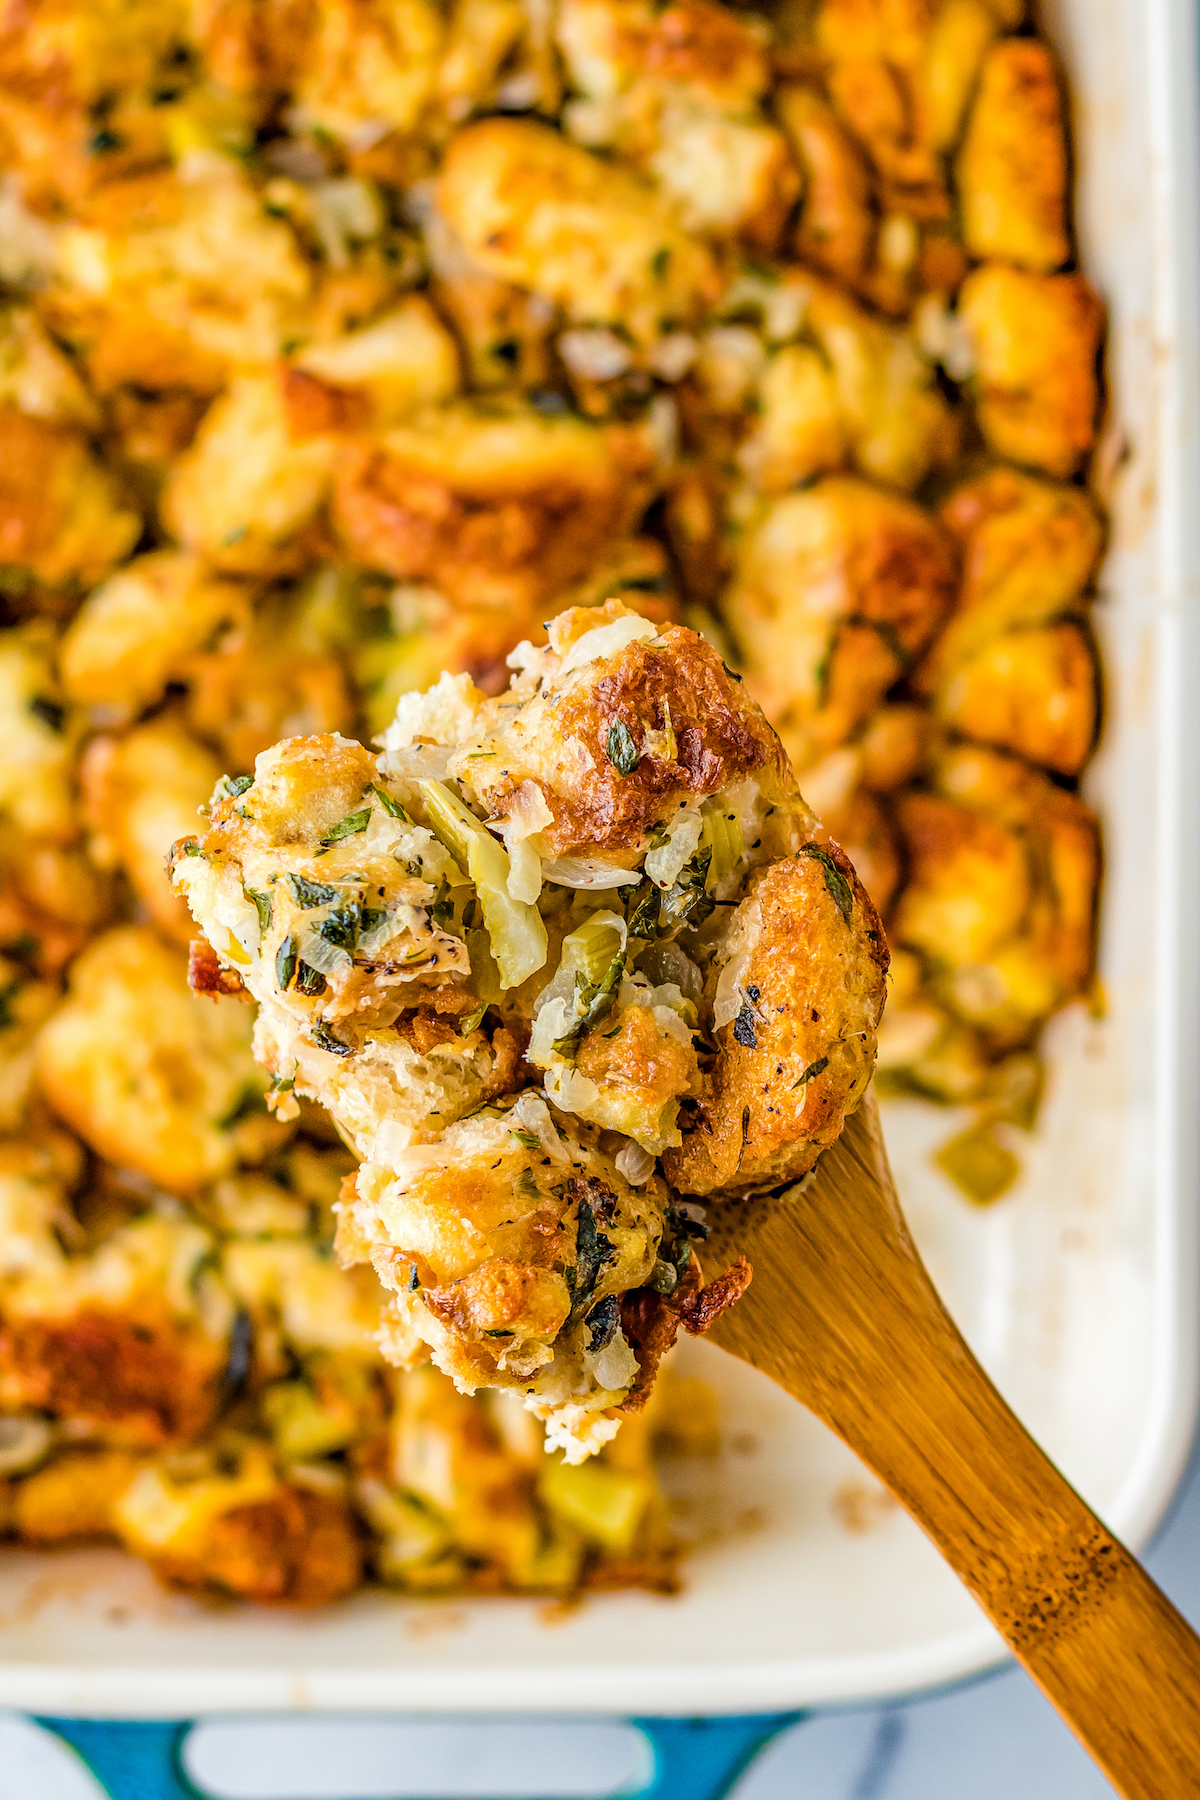 Homemade stuffing on a wooden spatula.